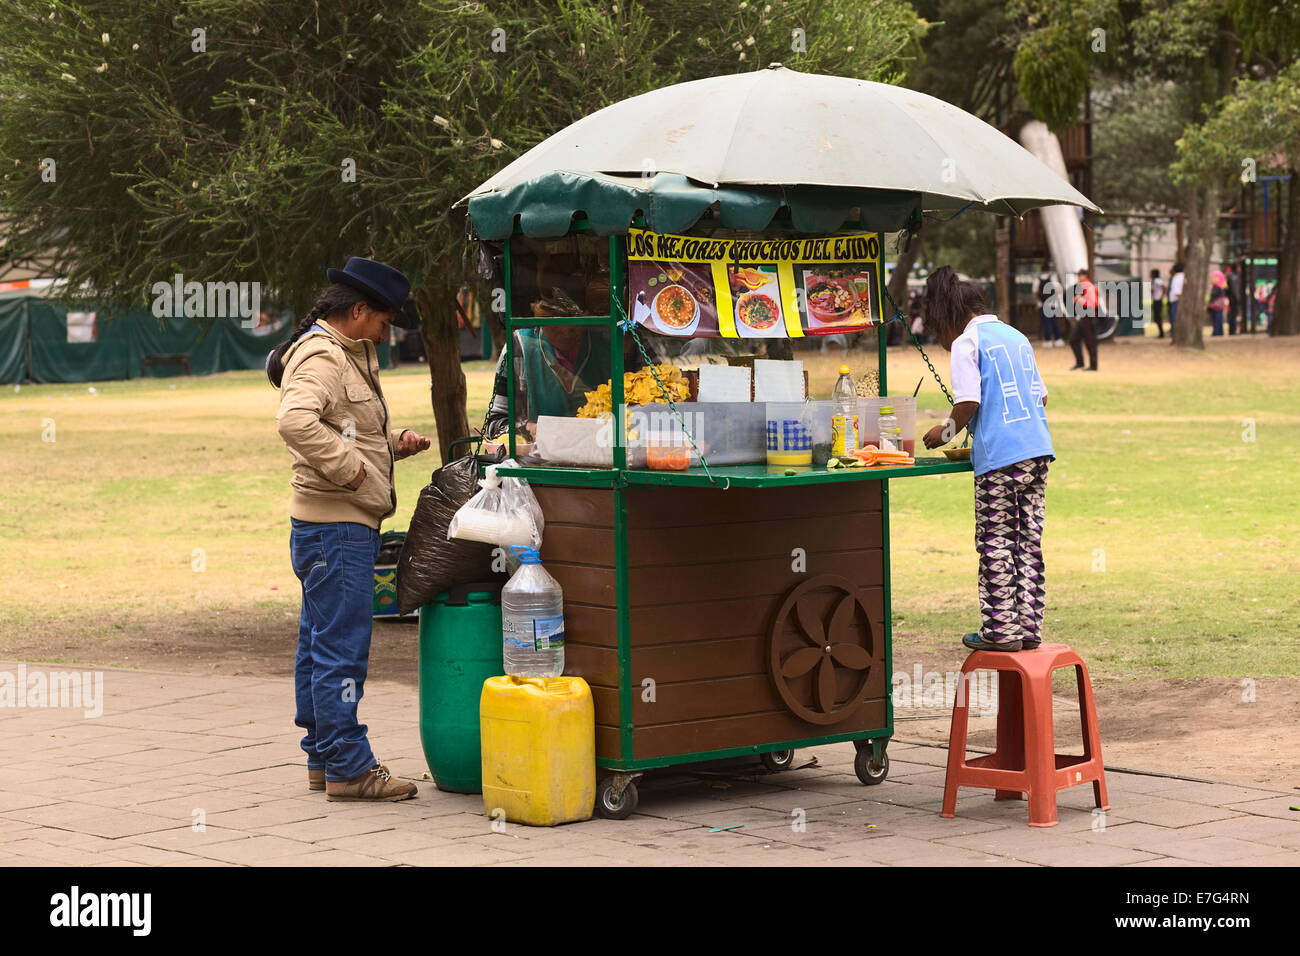 Unidentified people at snack stand selling chochos (white beans) in El Ejido Park in Quito, Ecuador Stock Photo